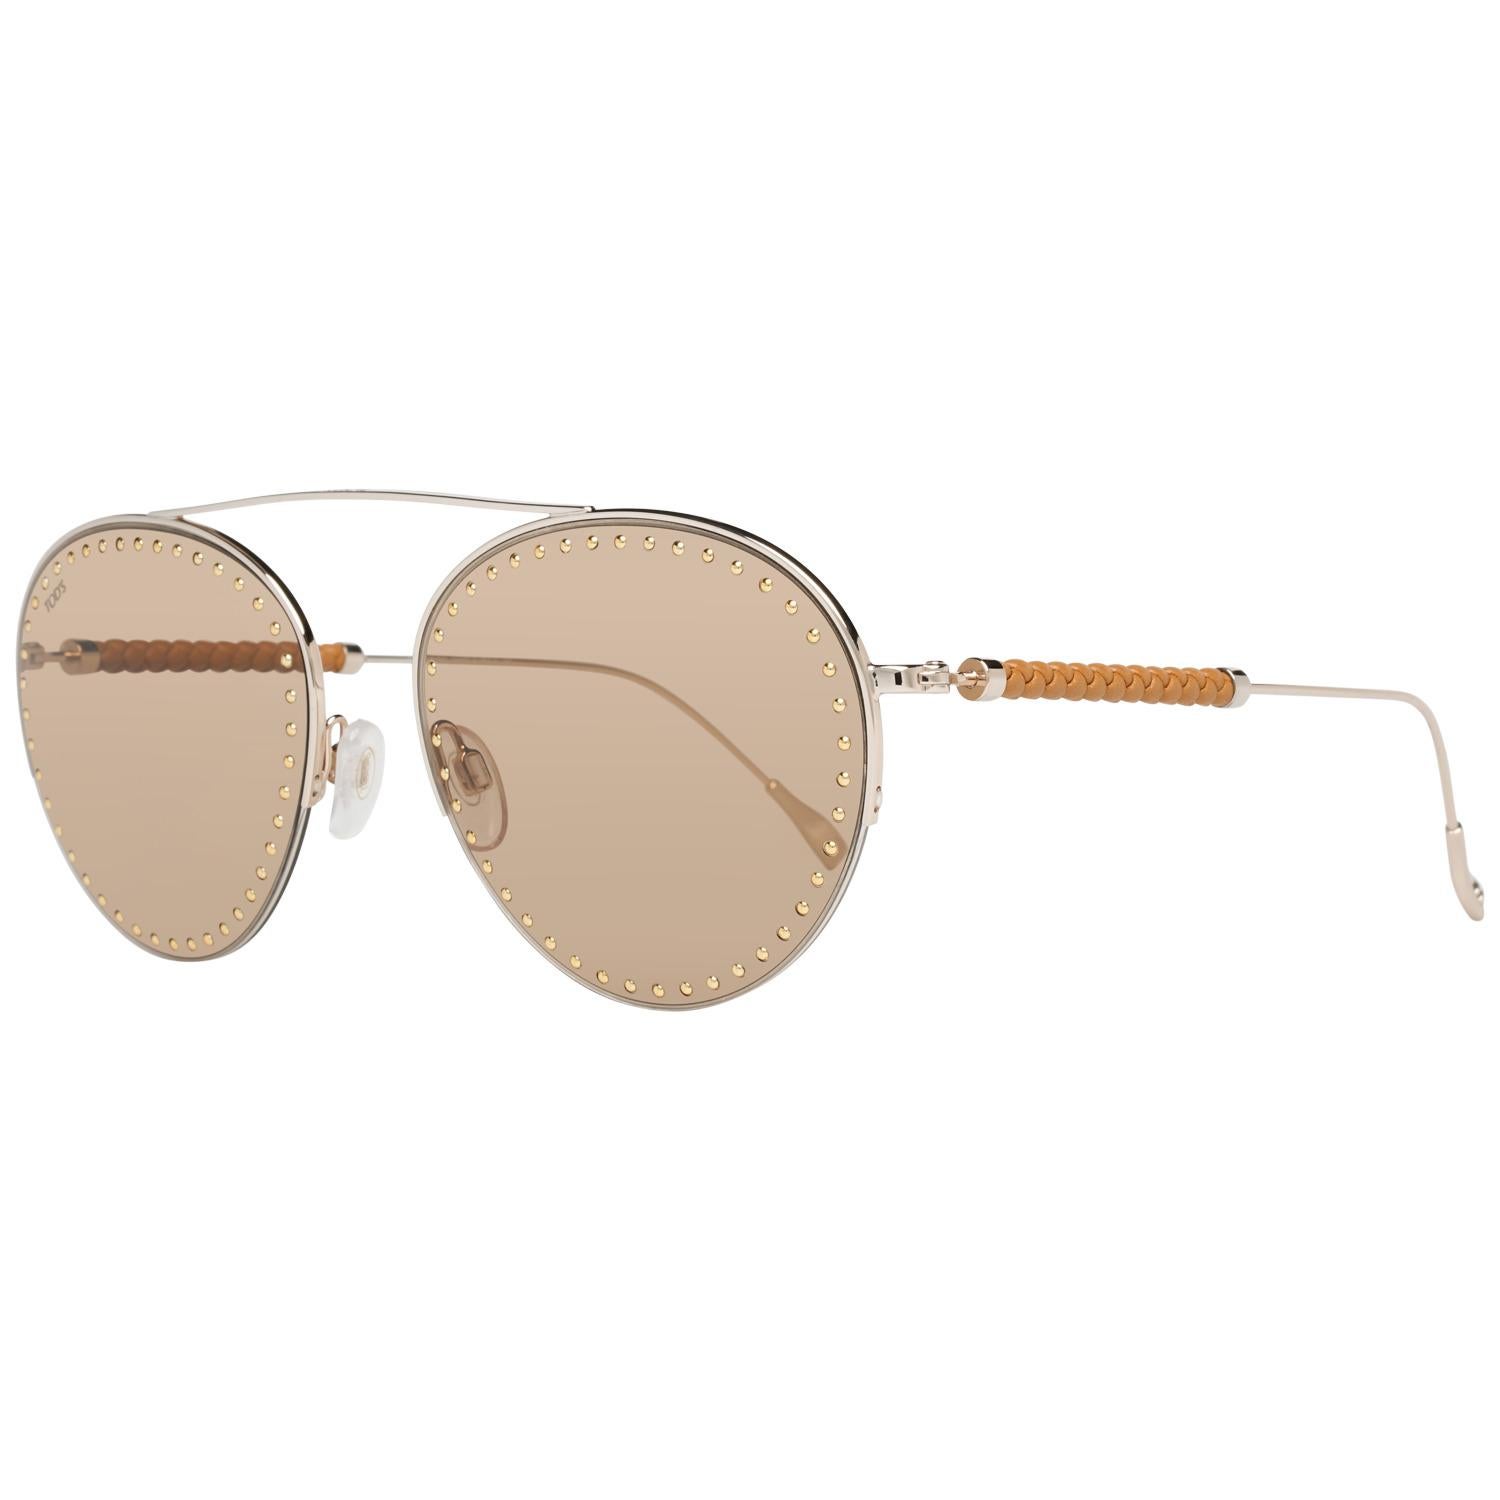 Tod's Mint Rose Gold Sunglasses TO0234 6028E 60-17 150 mm

Details

MATERIAL: Metal

COLOR: Gold

MODEL: TO0234 6028E

GENDER:

COUNTRY OF MANUFACTURE: Italy

ORIGINAL CASE?: Yes

STYLE: Aviator

LENS COLOR: